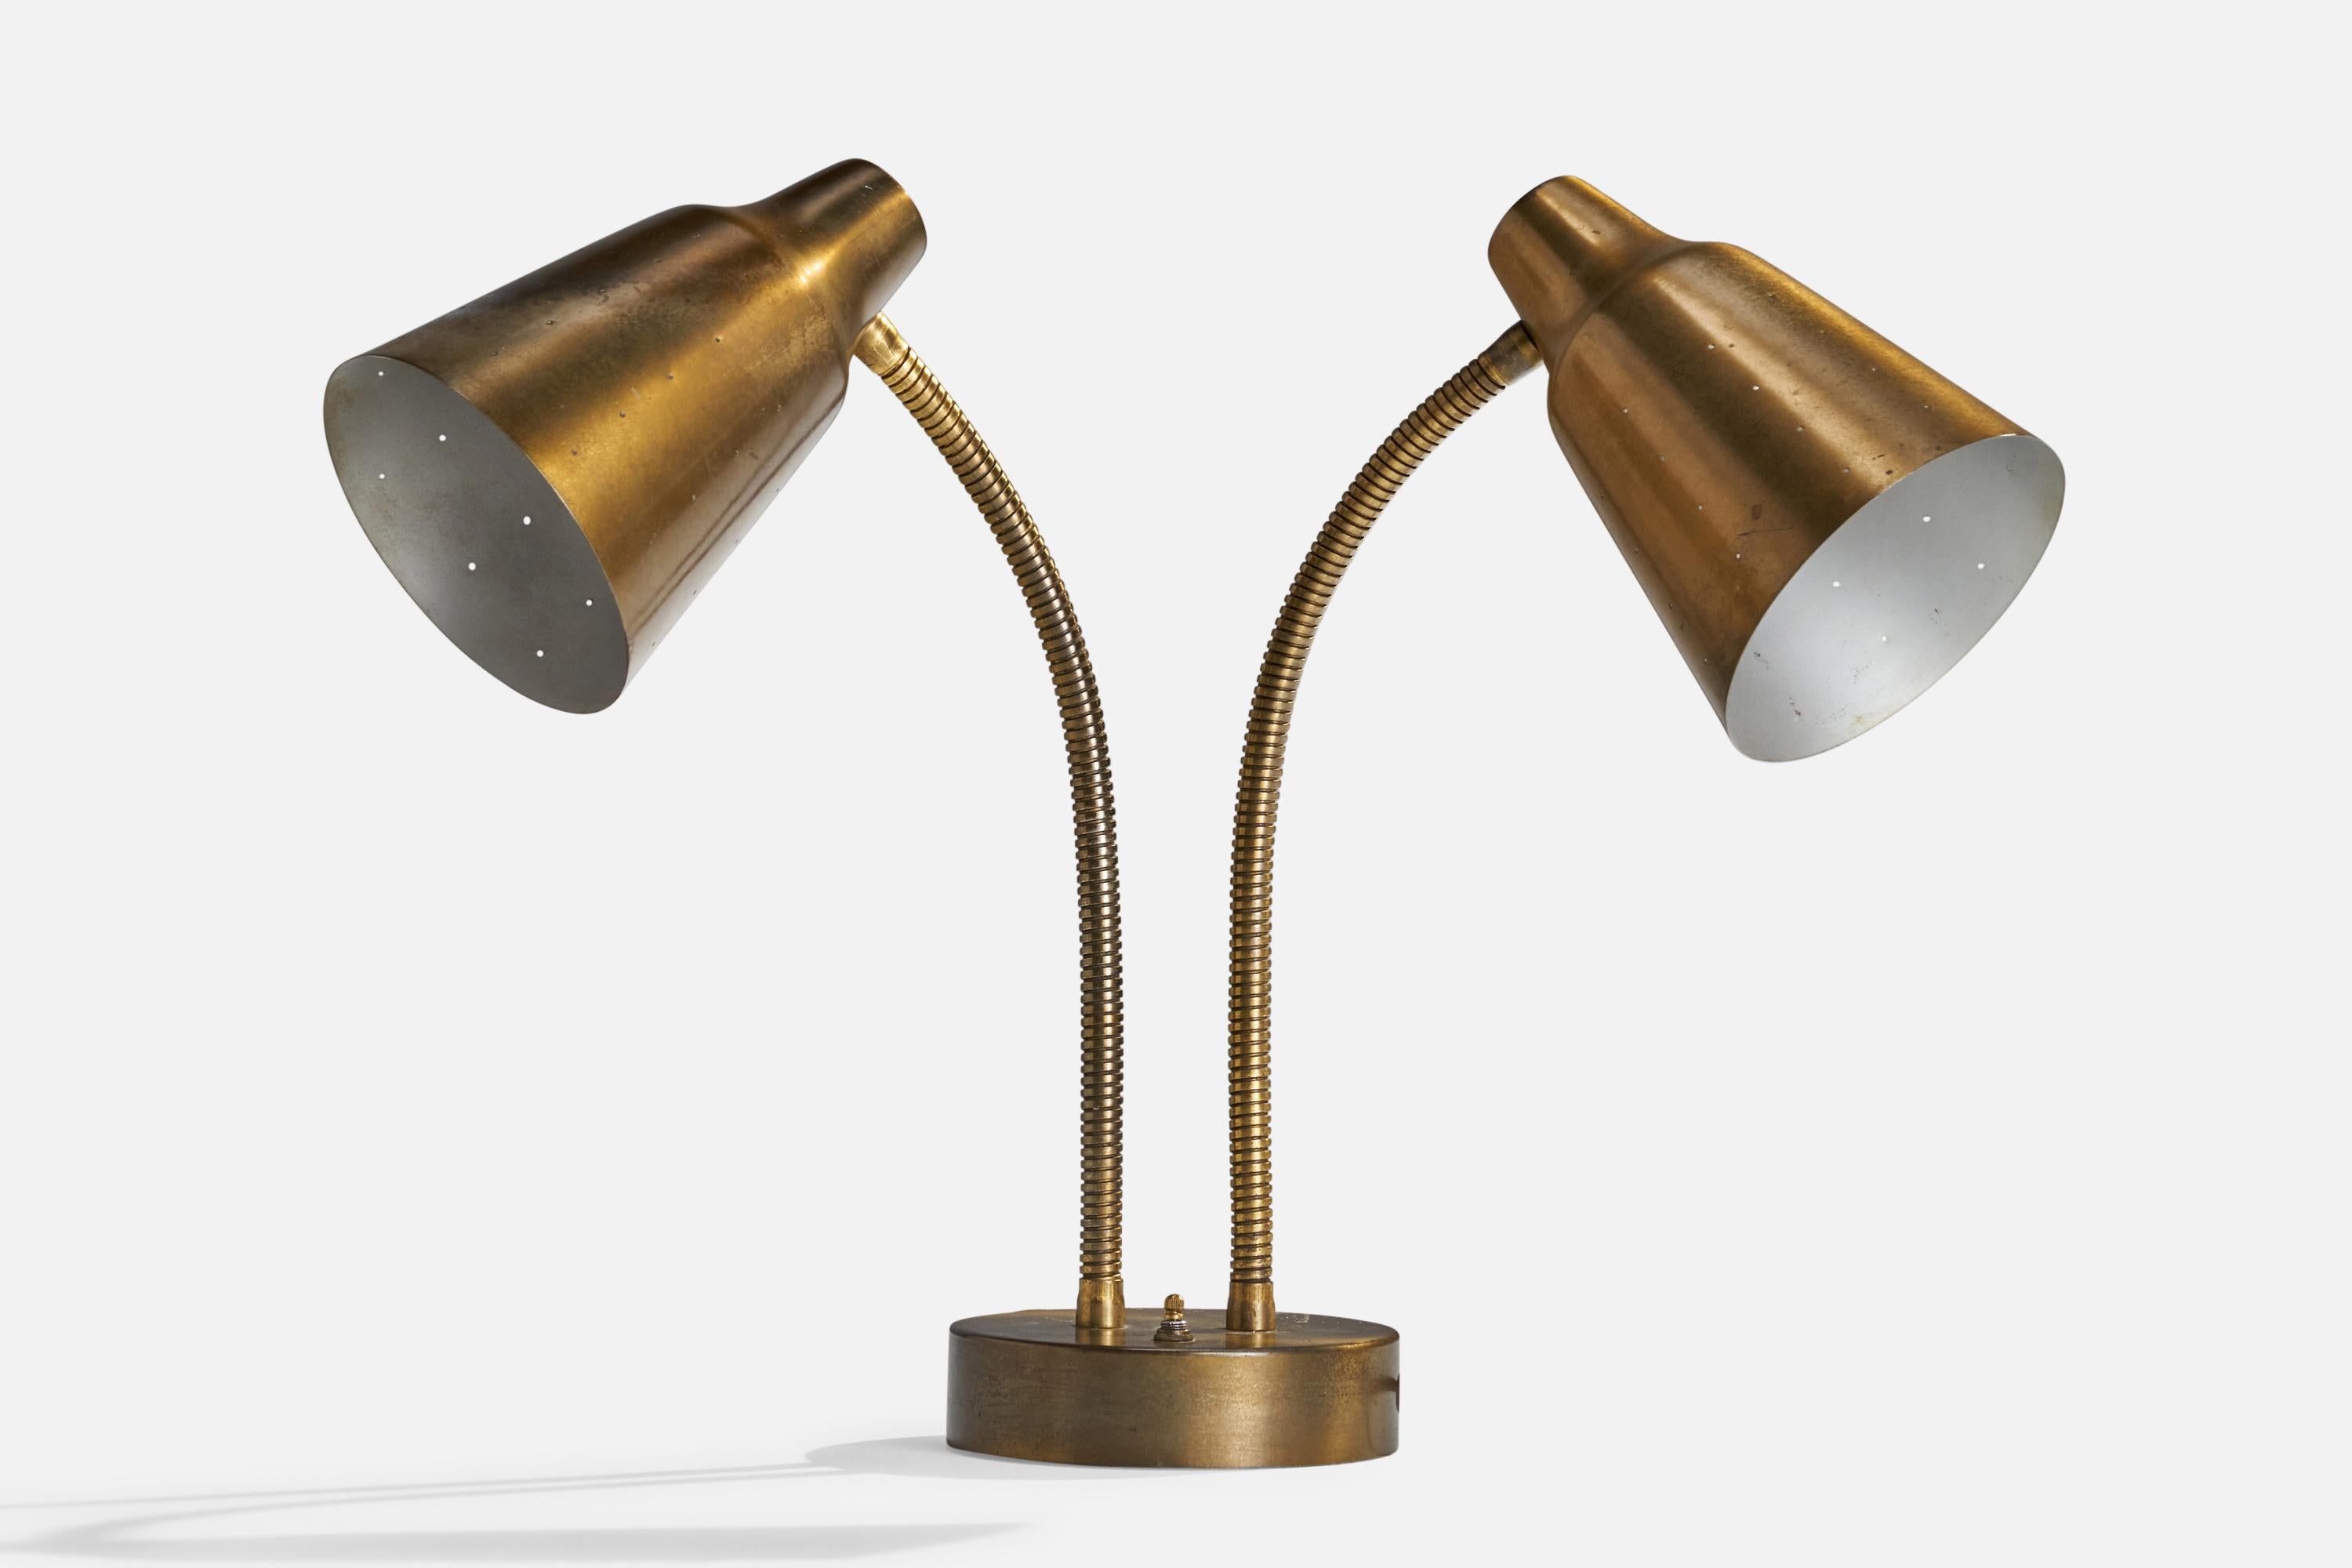 A two-armed brass table lamp designed and produced in the US, 1950s.

Overall Dimensions (inches): 17” H x 21.5” W x 12.75” D
Bulb Specifications: E-26 Bulb
Number of Sockets: 2
All lighting will be converted for US usage. We are unable to confirm